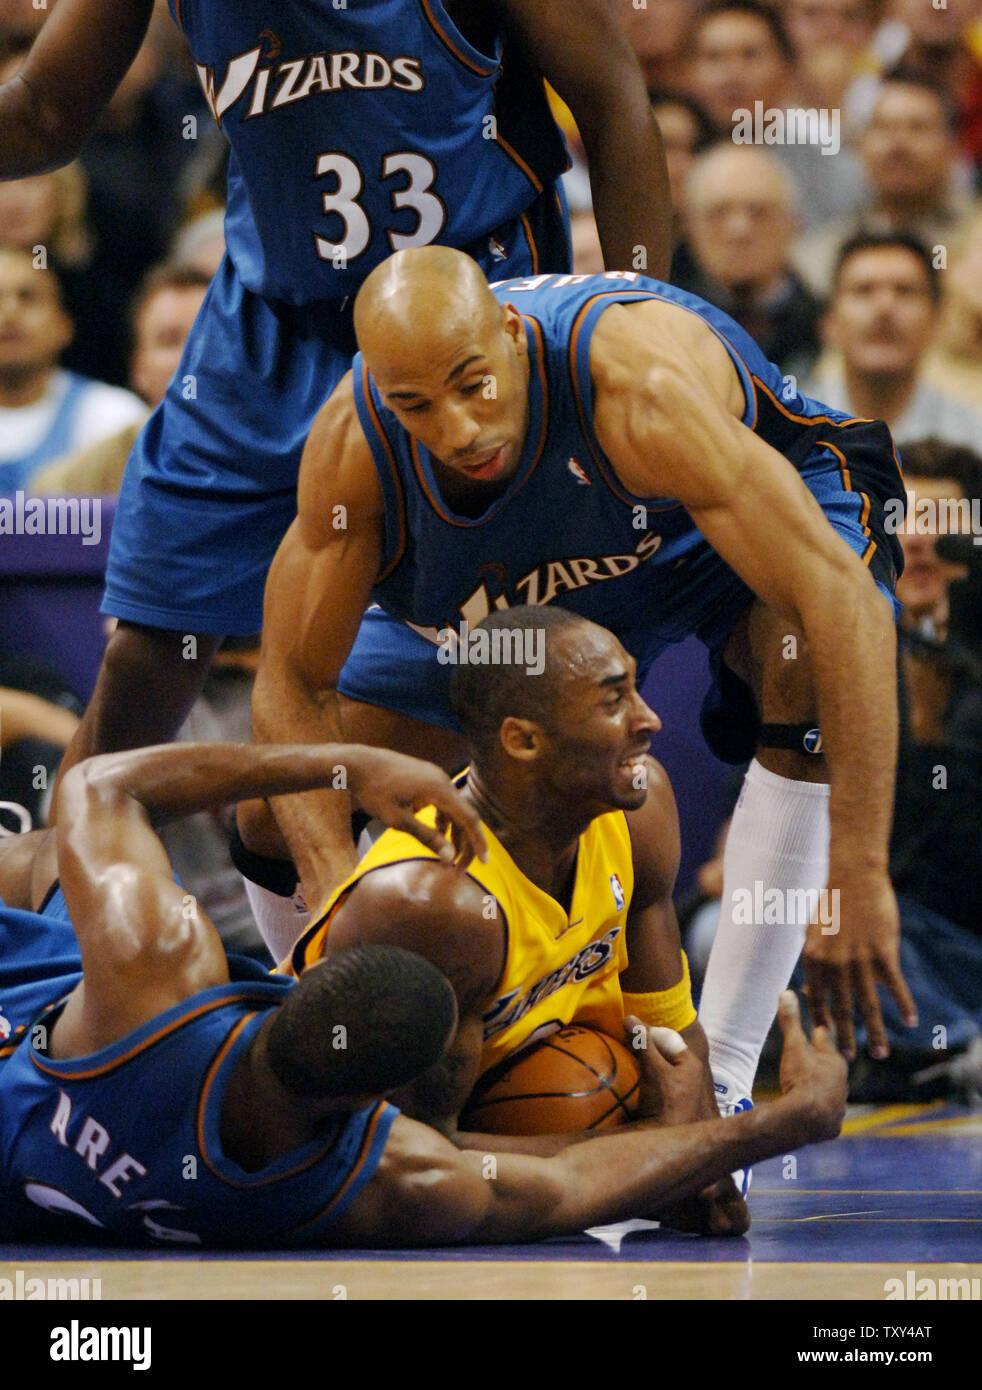 Los Angeles Lakers guard Kobe Bryant (C) fights for control of the ball as he is surrounded by Washingtron Wizzards Gilbert Arenas, Brendan Haywood and Michael Ruffin during fourth quarter NBA action at Staples Center in Los Angeles December 16, 2005. The Lakers defeated the Wizzards 97-91. (UPI Photo/Jim Ruymen) Stock Photo